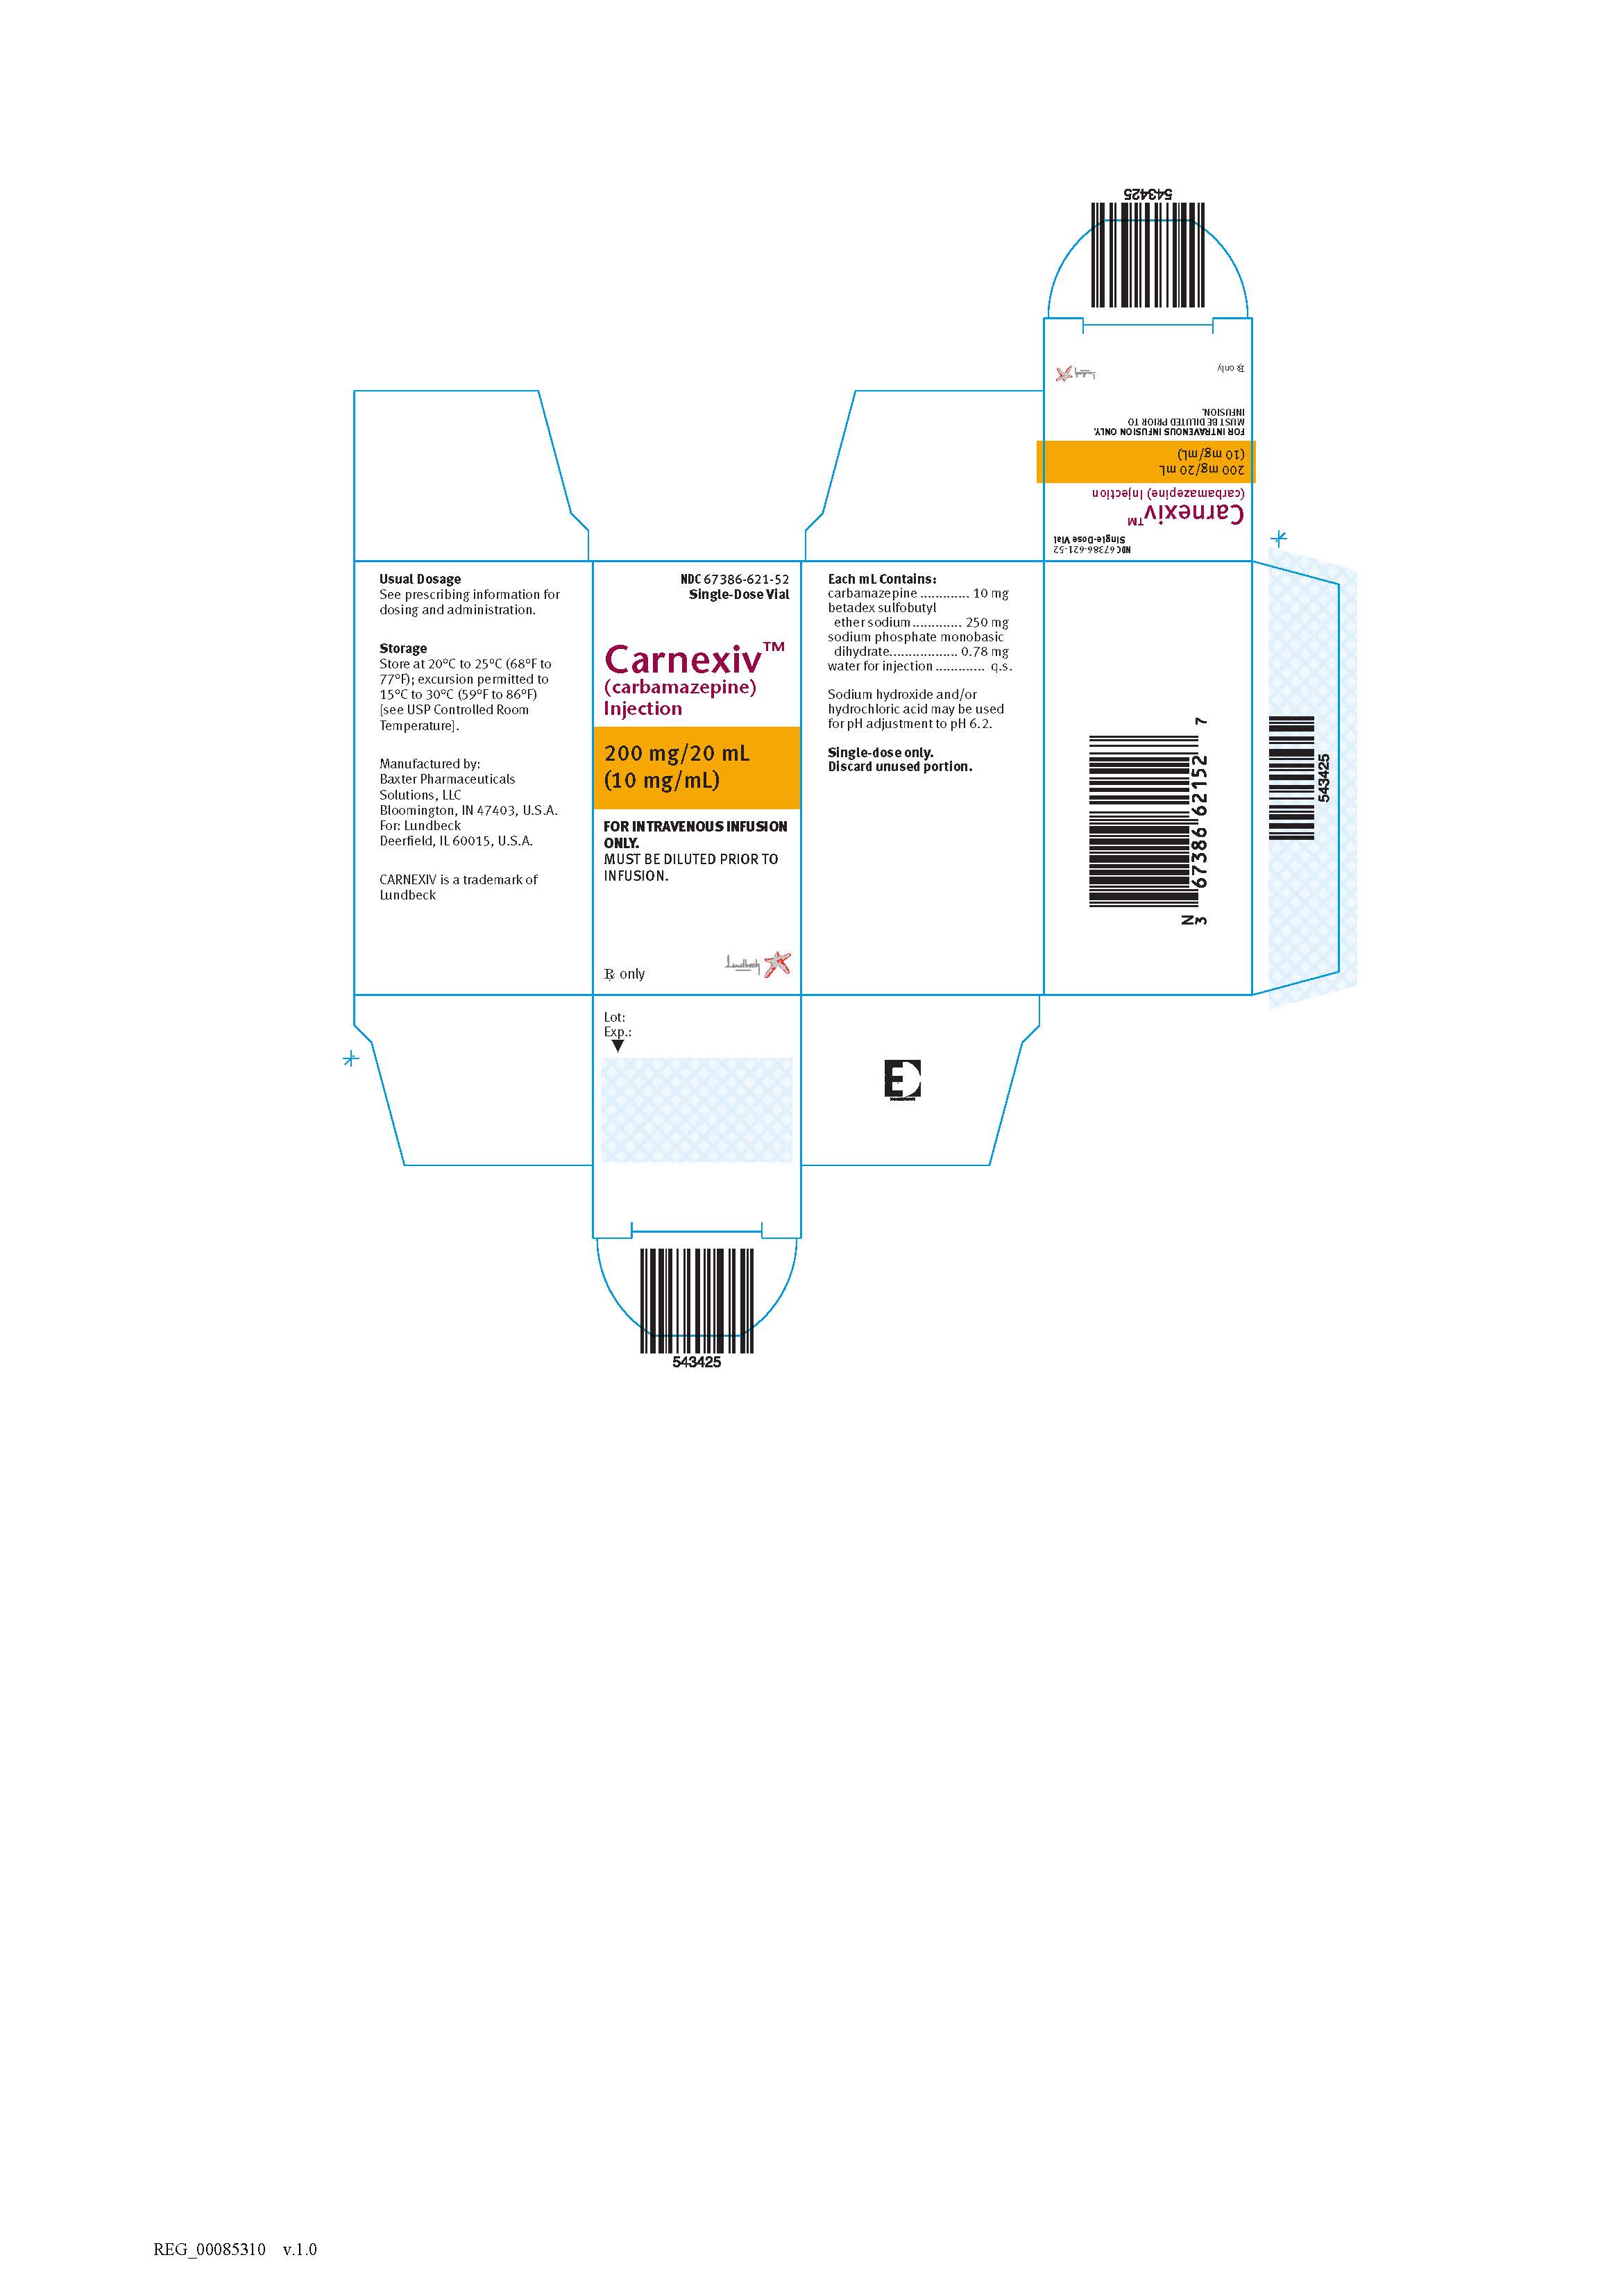 NDC 67386-621-52 Single Use Vial Carnexiv™ (carbamazepine) Injection 200 mg/20mL 10 mg/mL For Intravenous use only. MUST BE DILUTED PRIOR TO INFUSION.